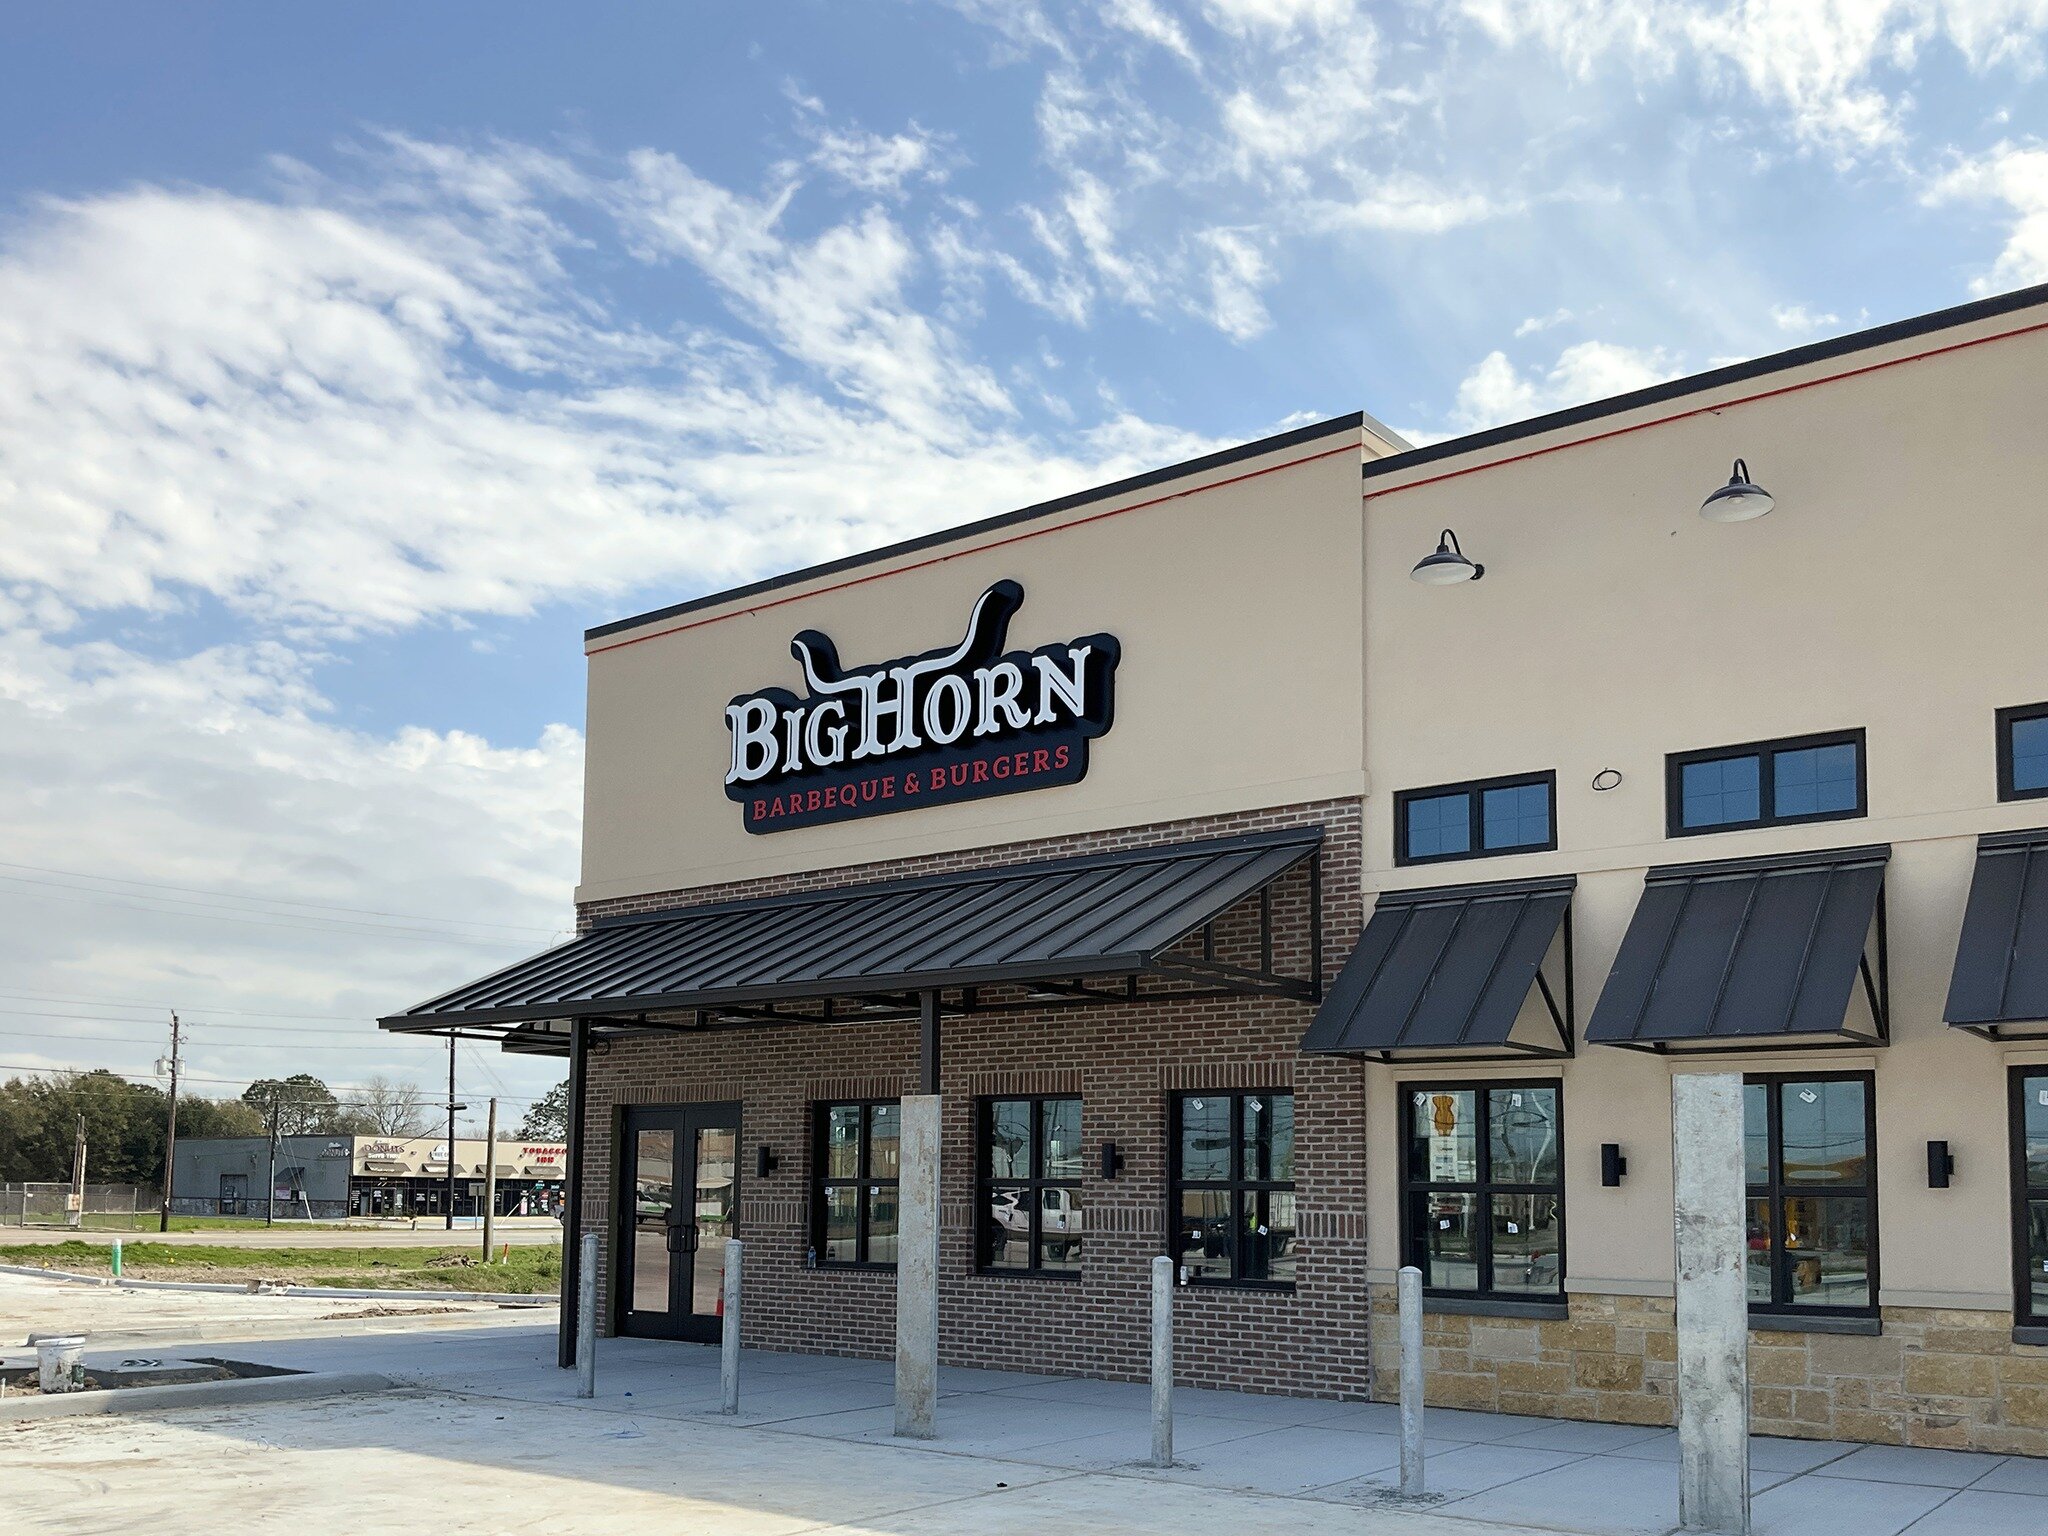 🌟 Light up your business with Front-Lit Channel Letters and a Custom Backer Panel! 🌟
Tailored for Big Horn BBQ, these signs:
✅ Shine day and night
✅ Grab attention with bold design
✅ Offer endless customization options
✅ Feature a unique backer pan